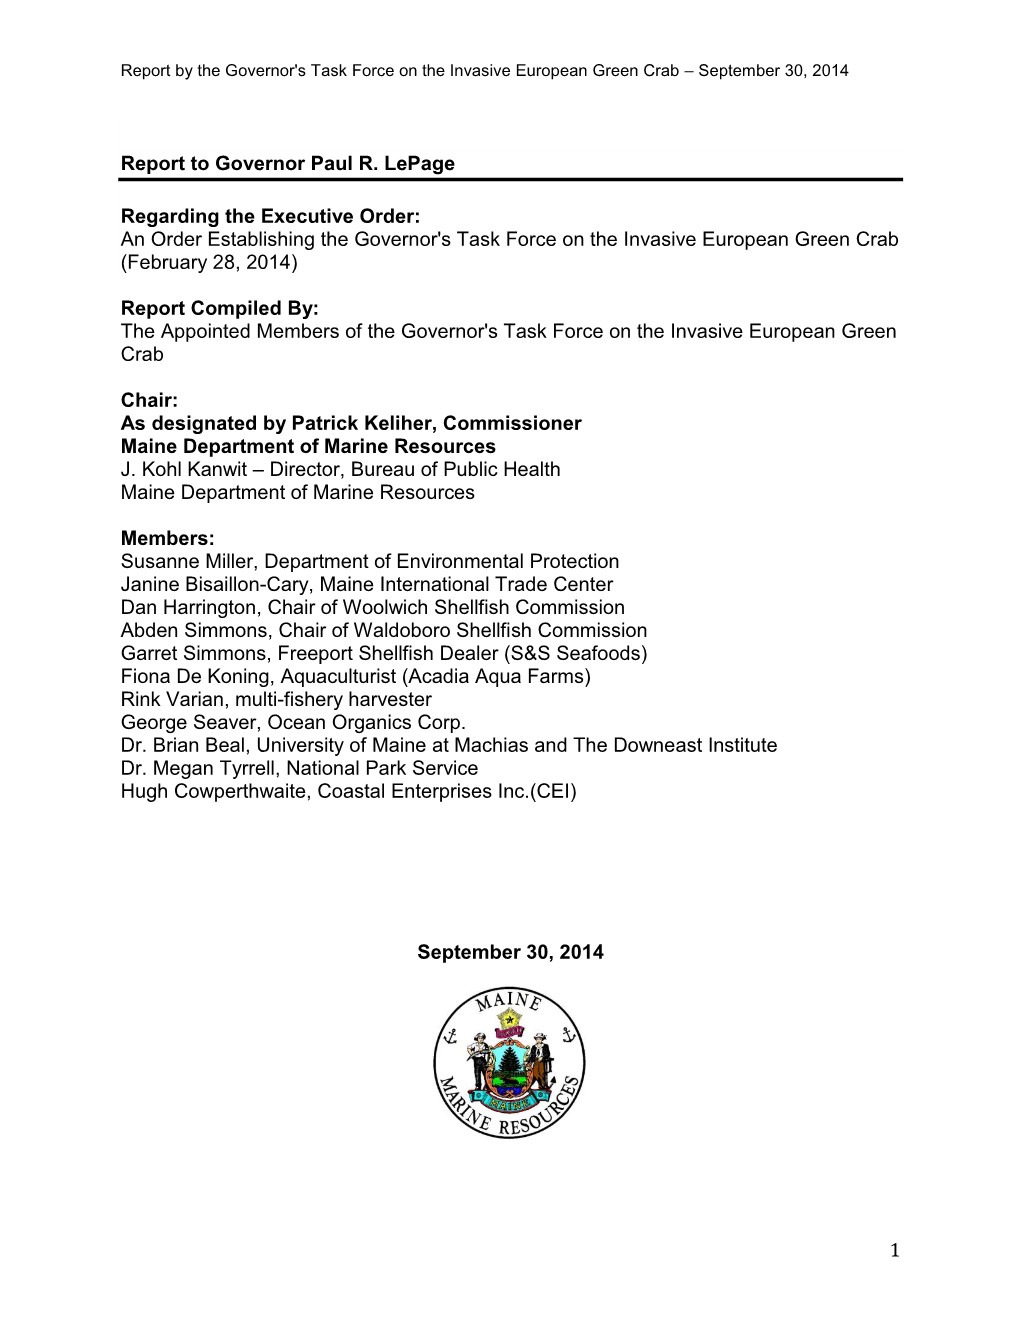 An Order Establishing the Governor's Task Force on the Invasive European Green Crab (February 28, 2014)